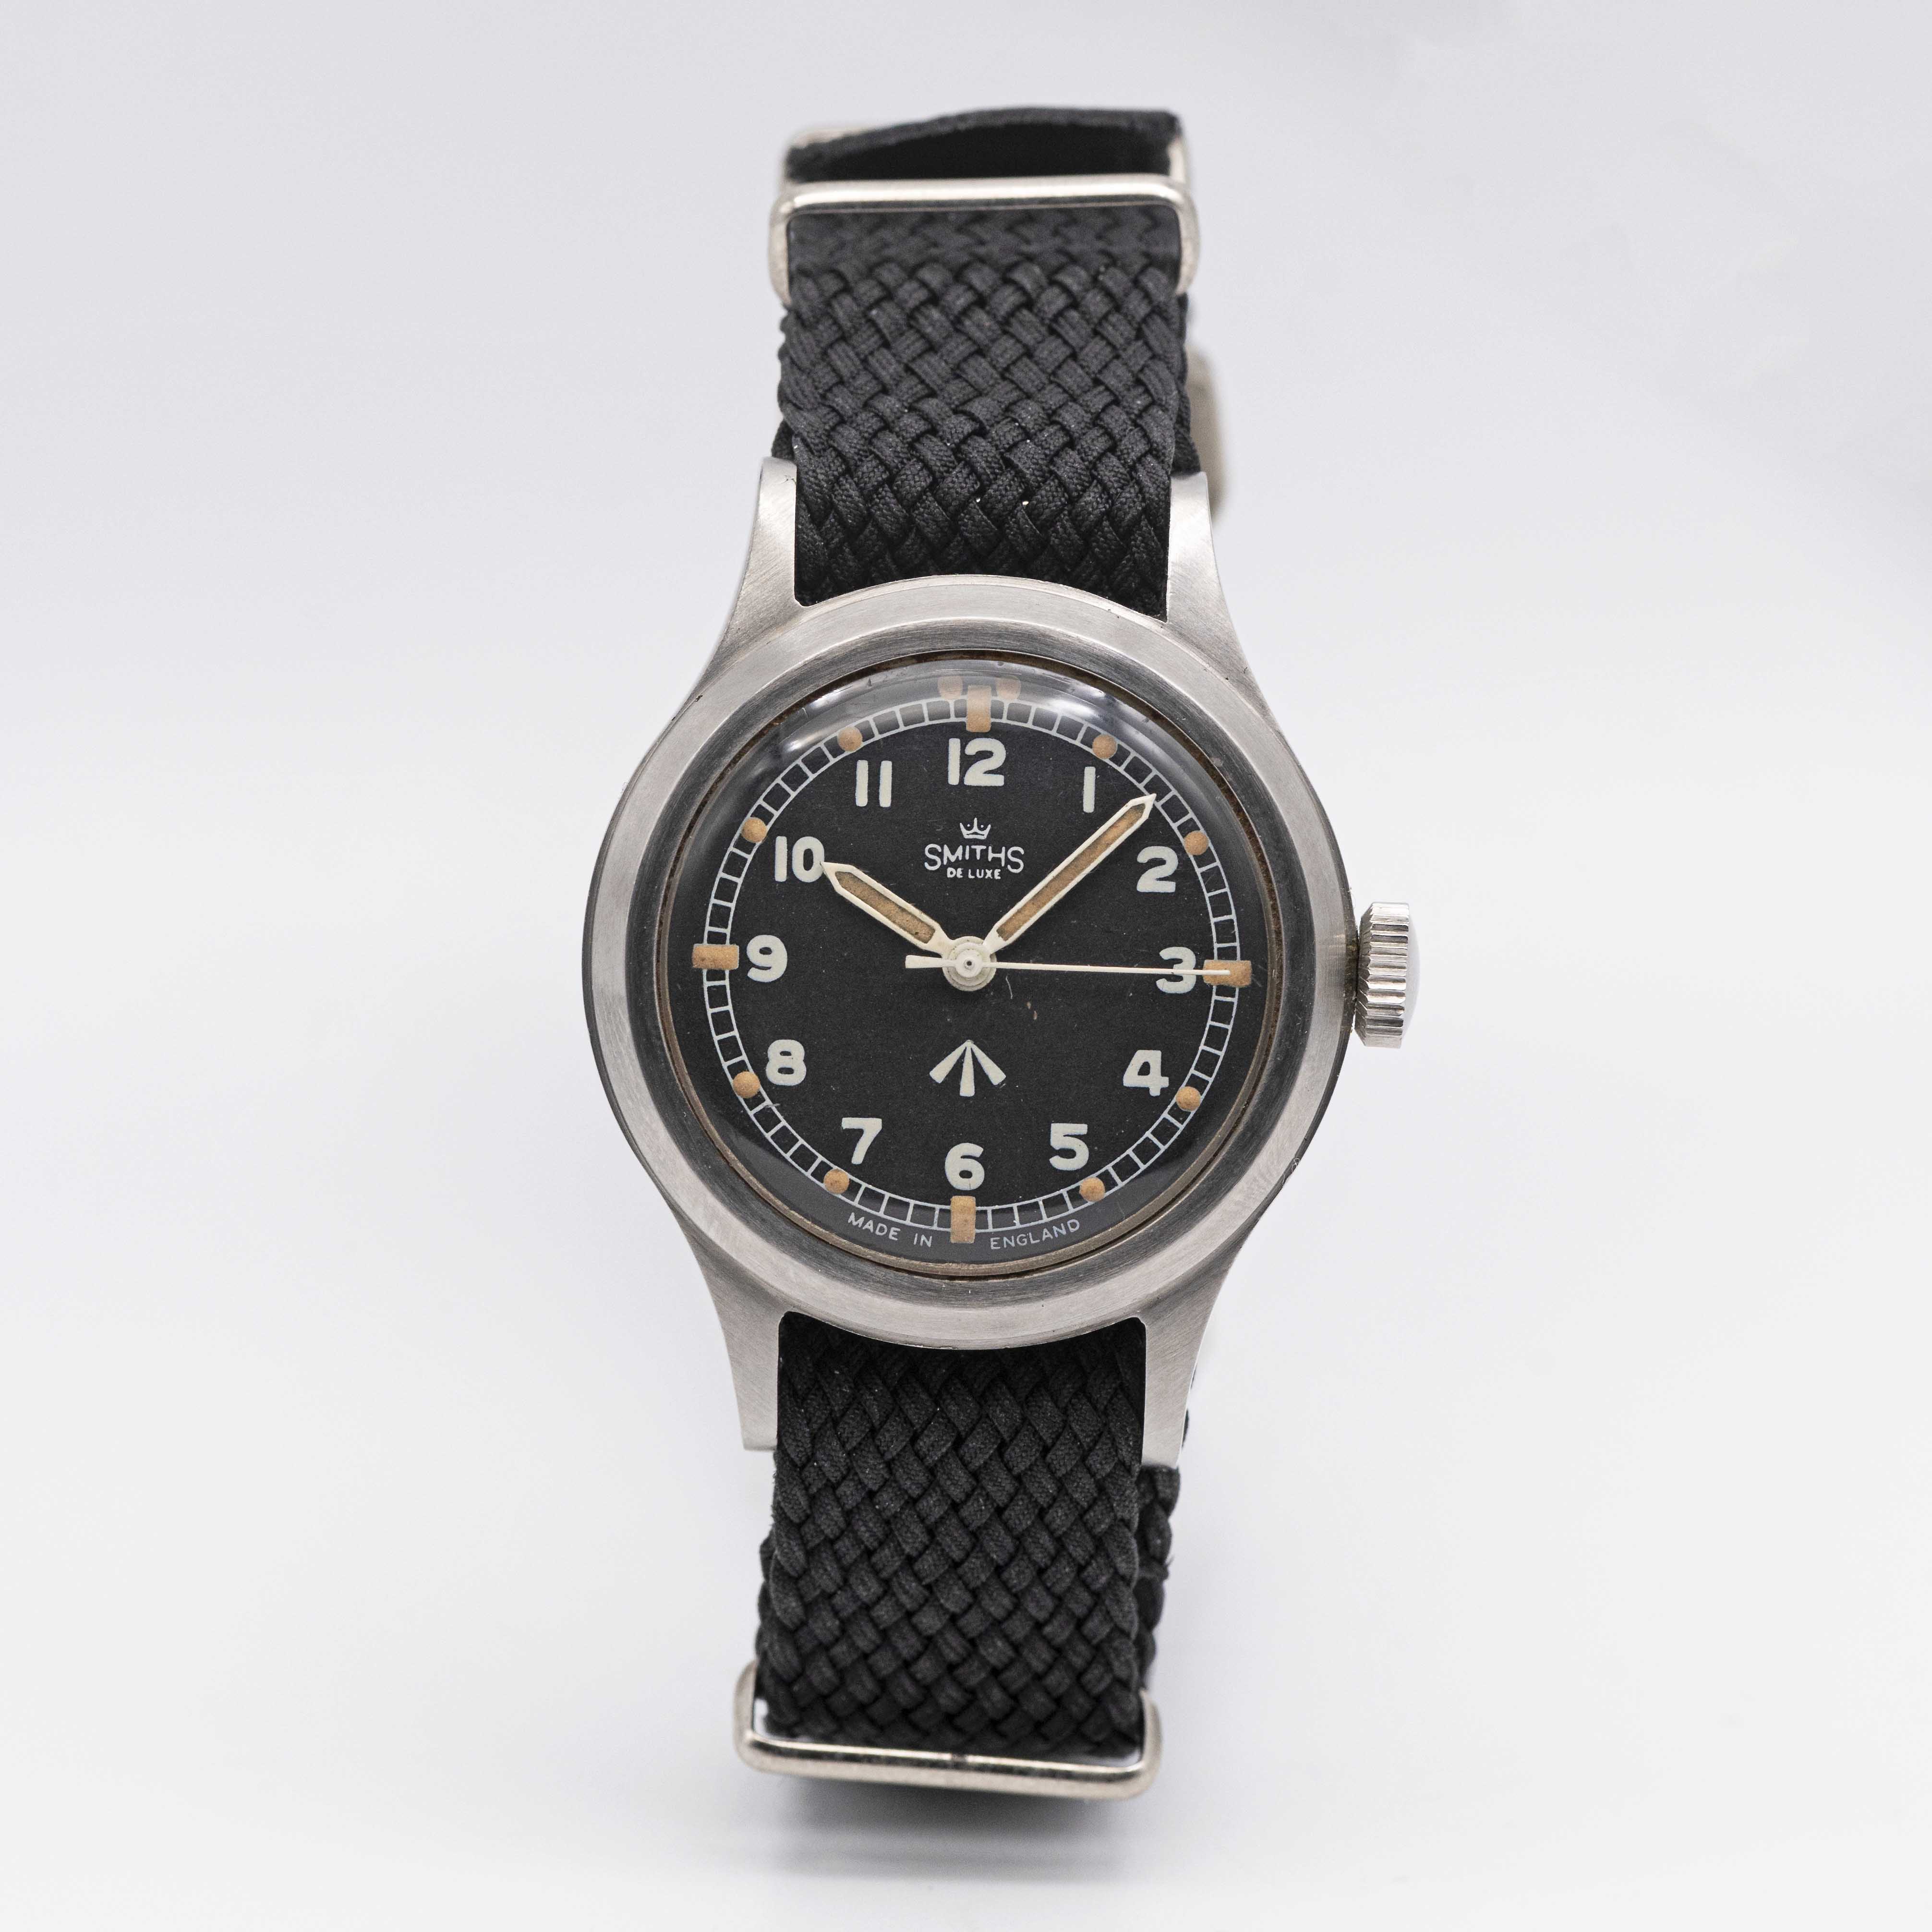 A VERY RARE GENTLEMAN'S STAINLESS STEEL BRITISH MILITARY SMITHS DE LUXE RAF PILOTS WRIST WATCH DATED - Image 5 of 11